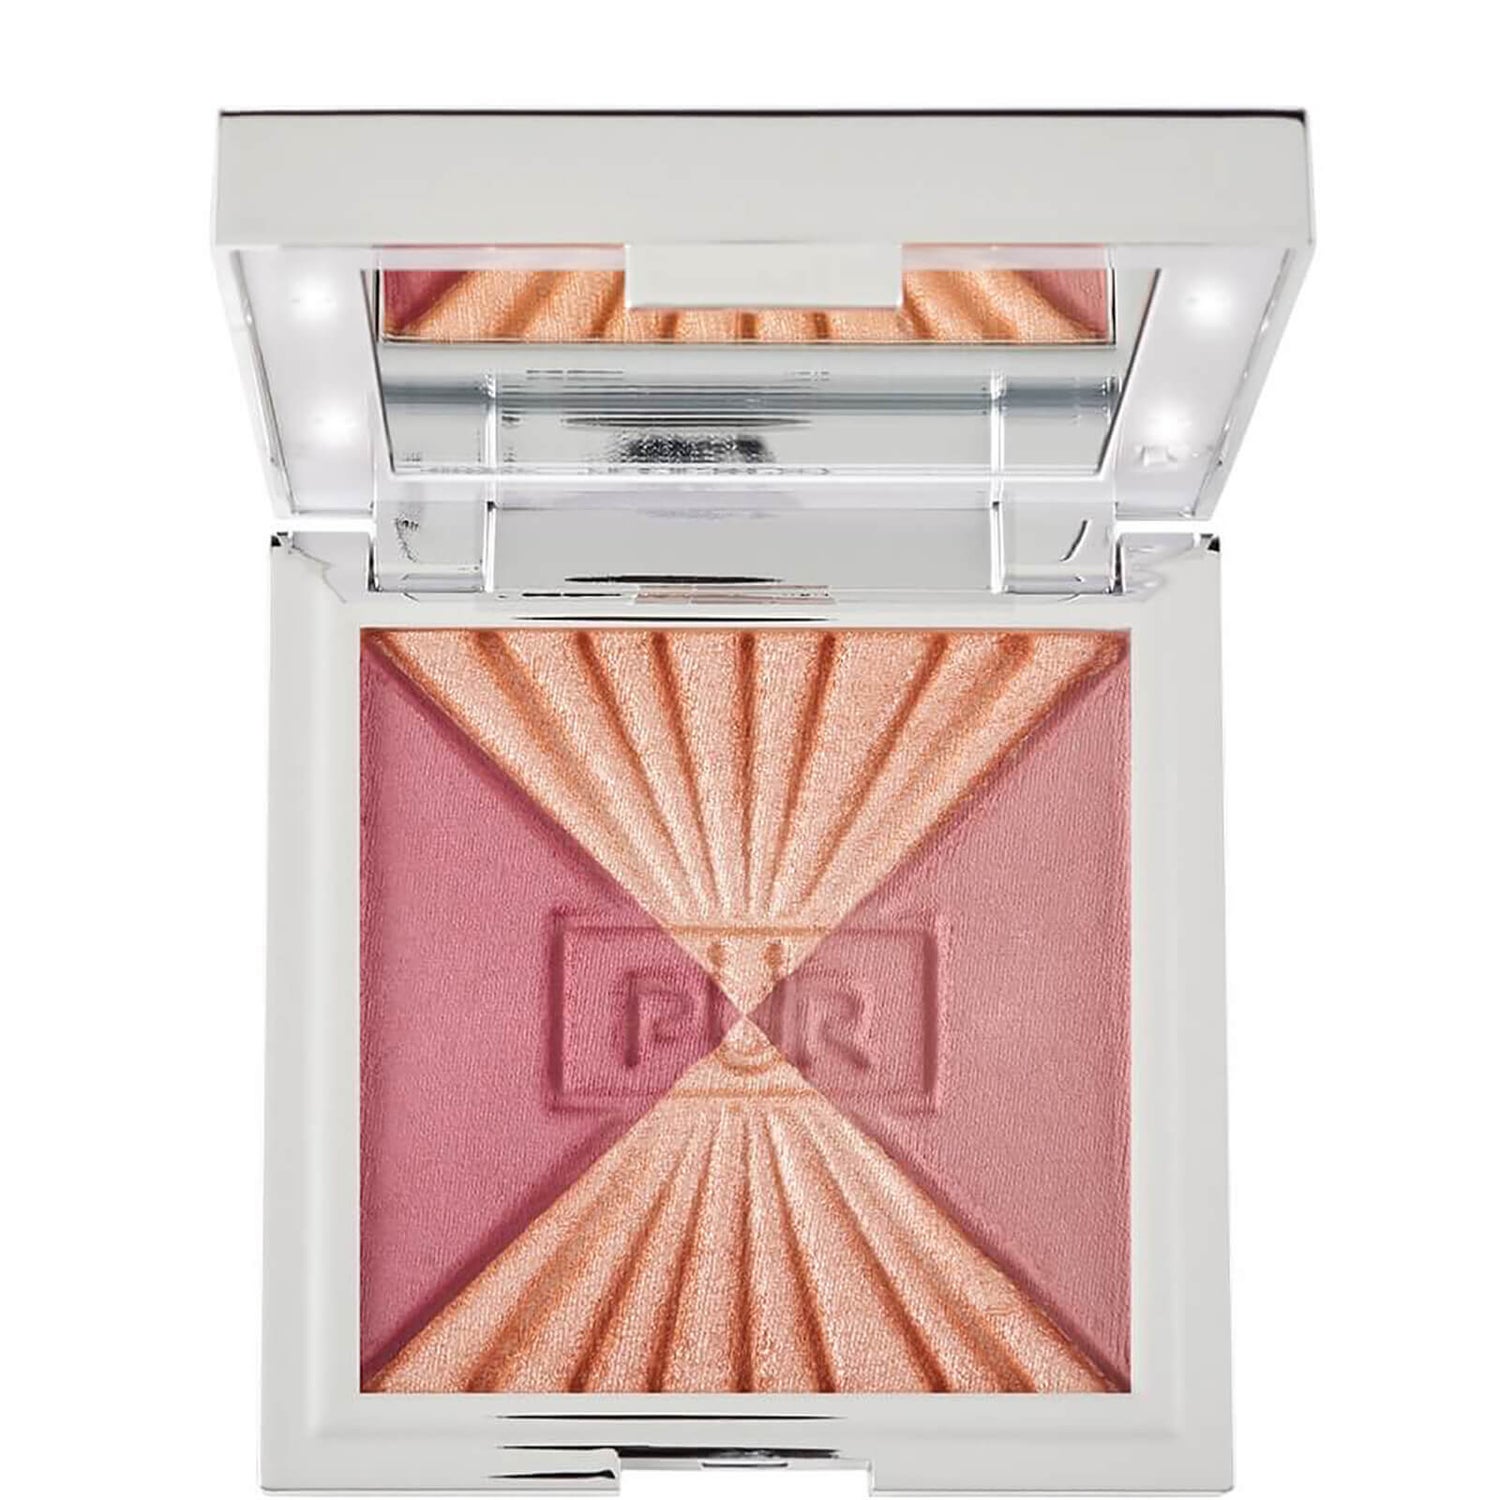 PÜR Out of the Blue 3-in-1 Vanity Blush Palette - Beam of Light 5g